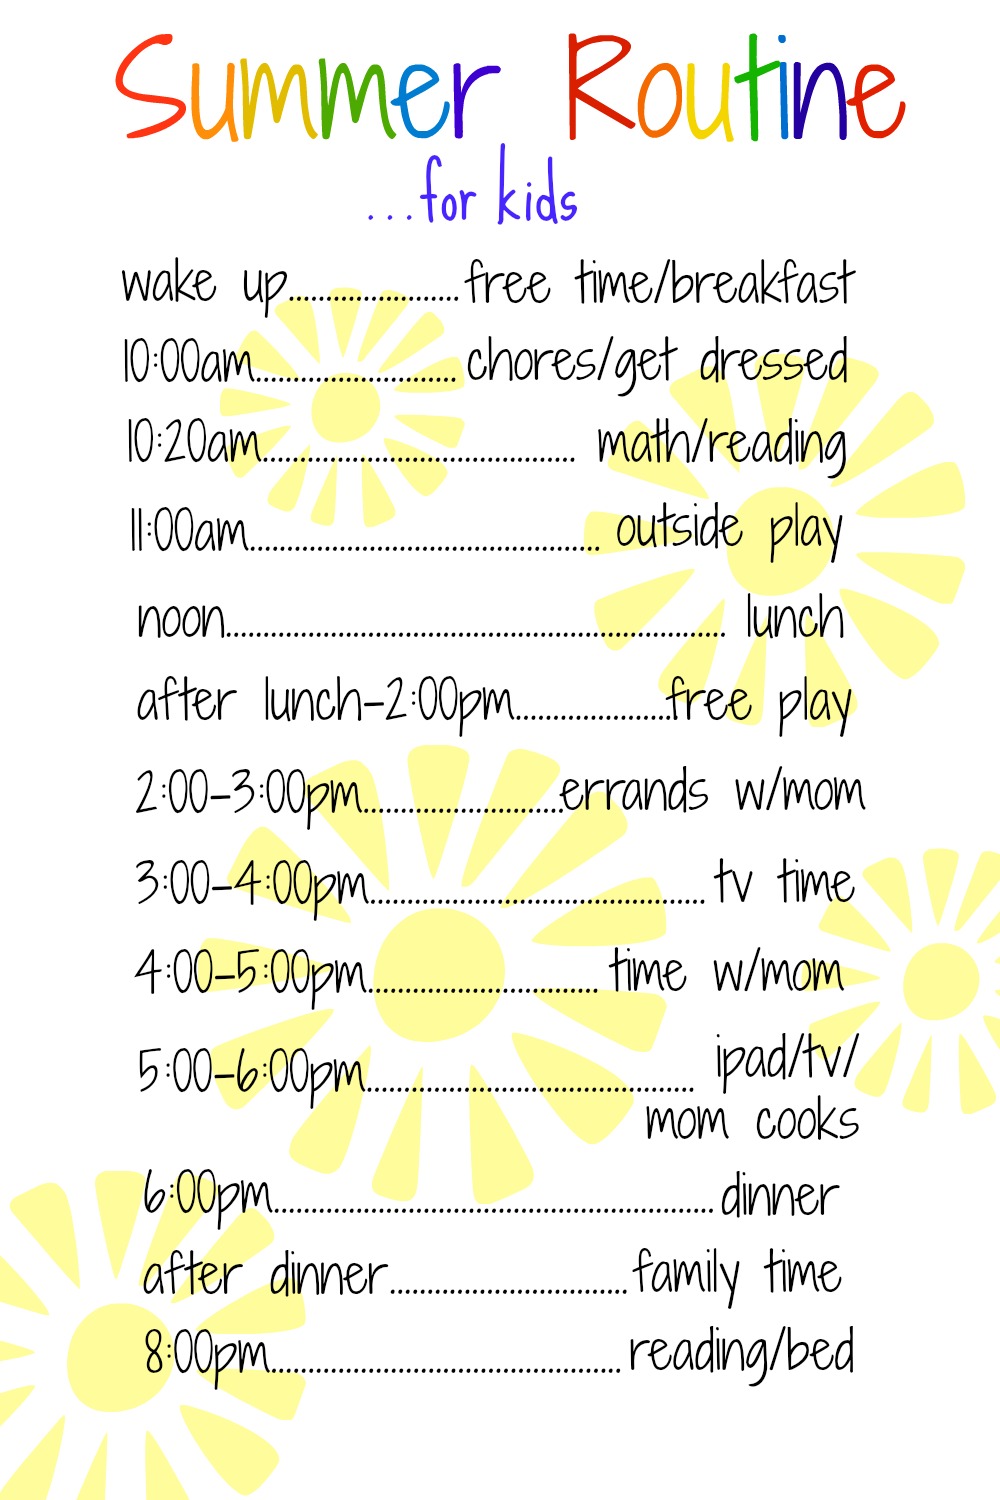 a daily routine for kids over the summer